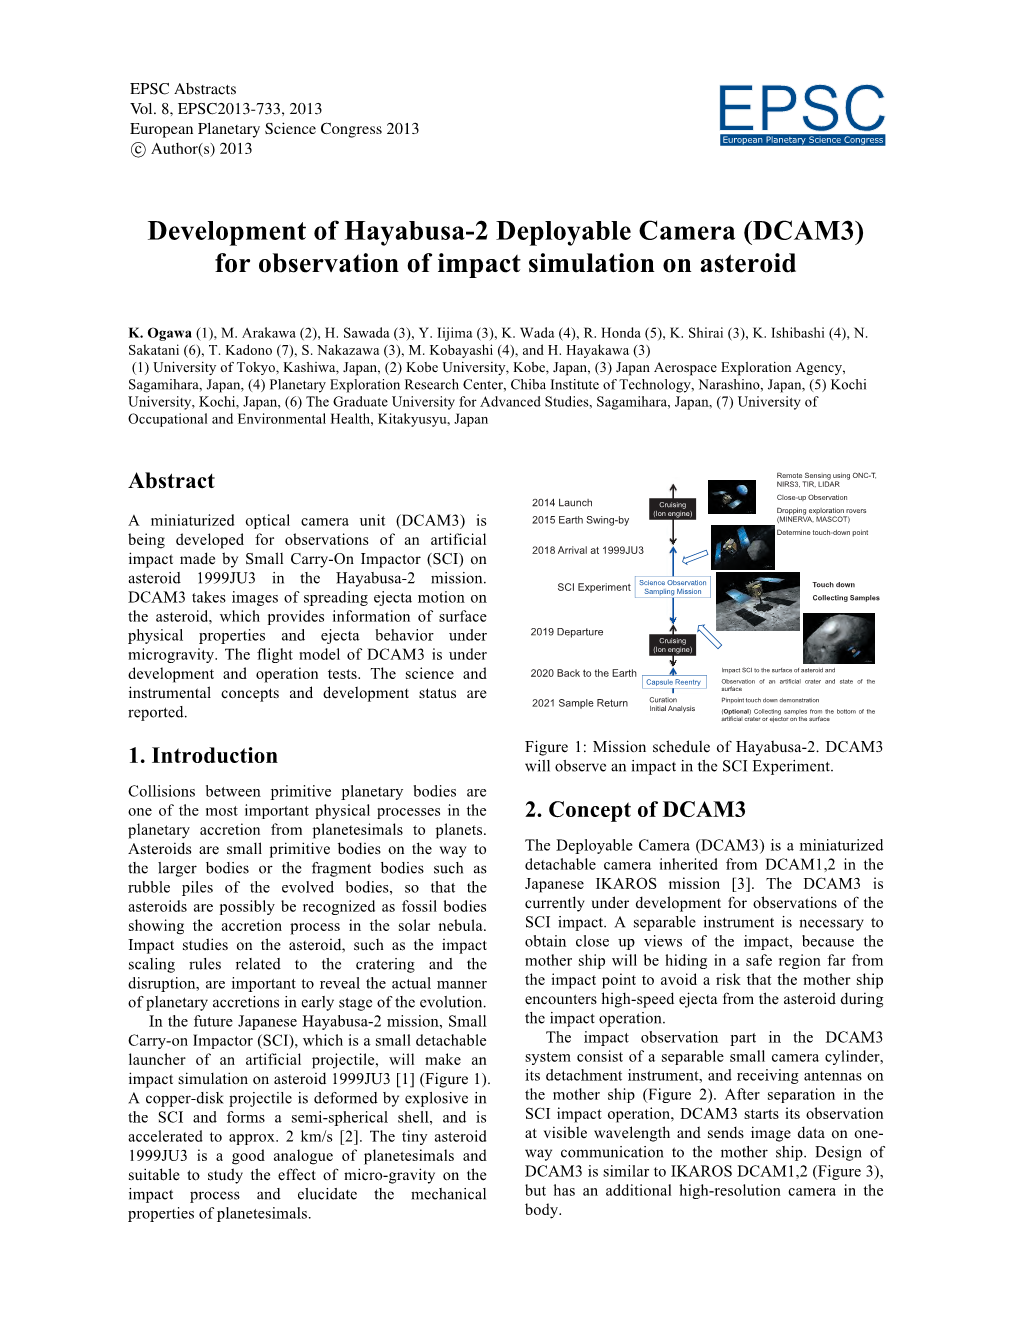 Development of Hayabusa-2 Deployable Camera (DCAM3) for Observation of Impact Simulation on Asteroid